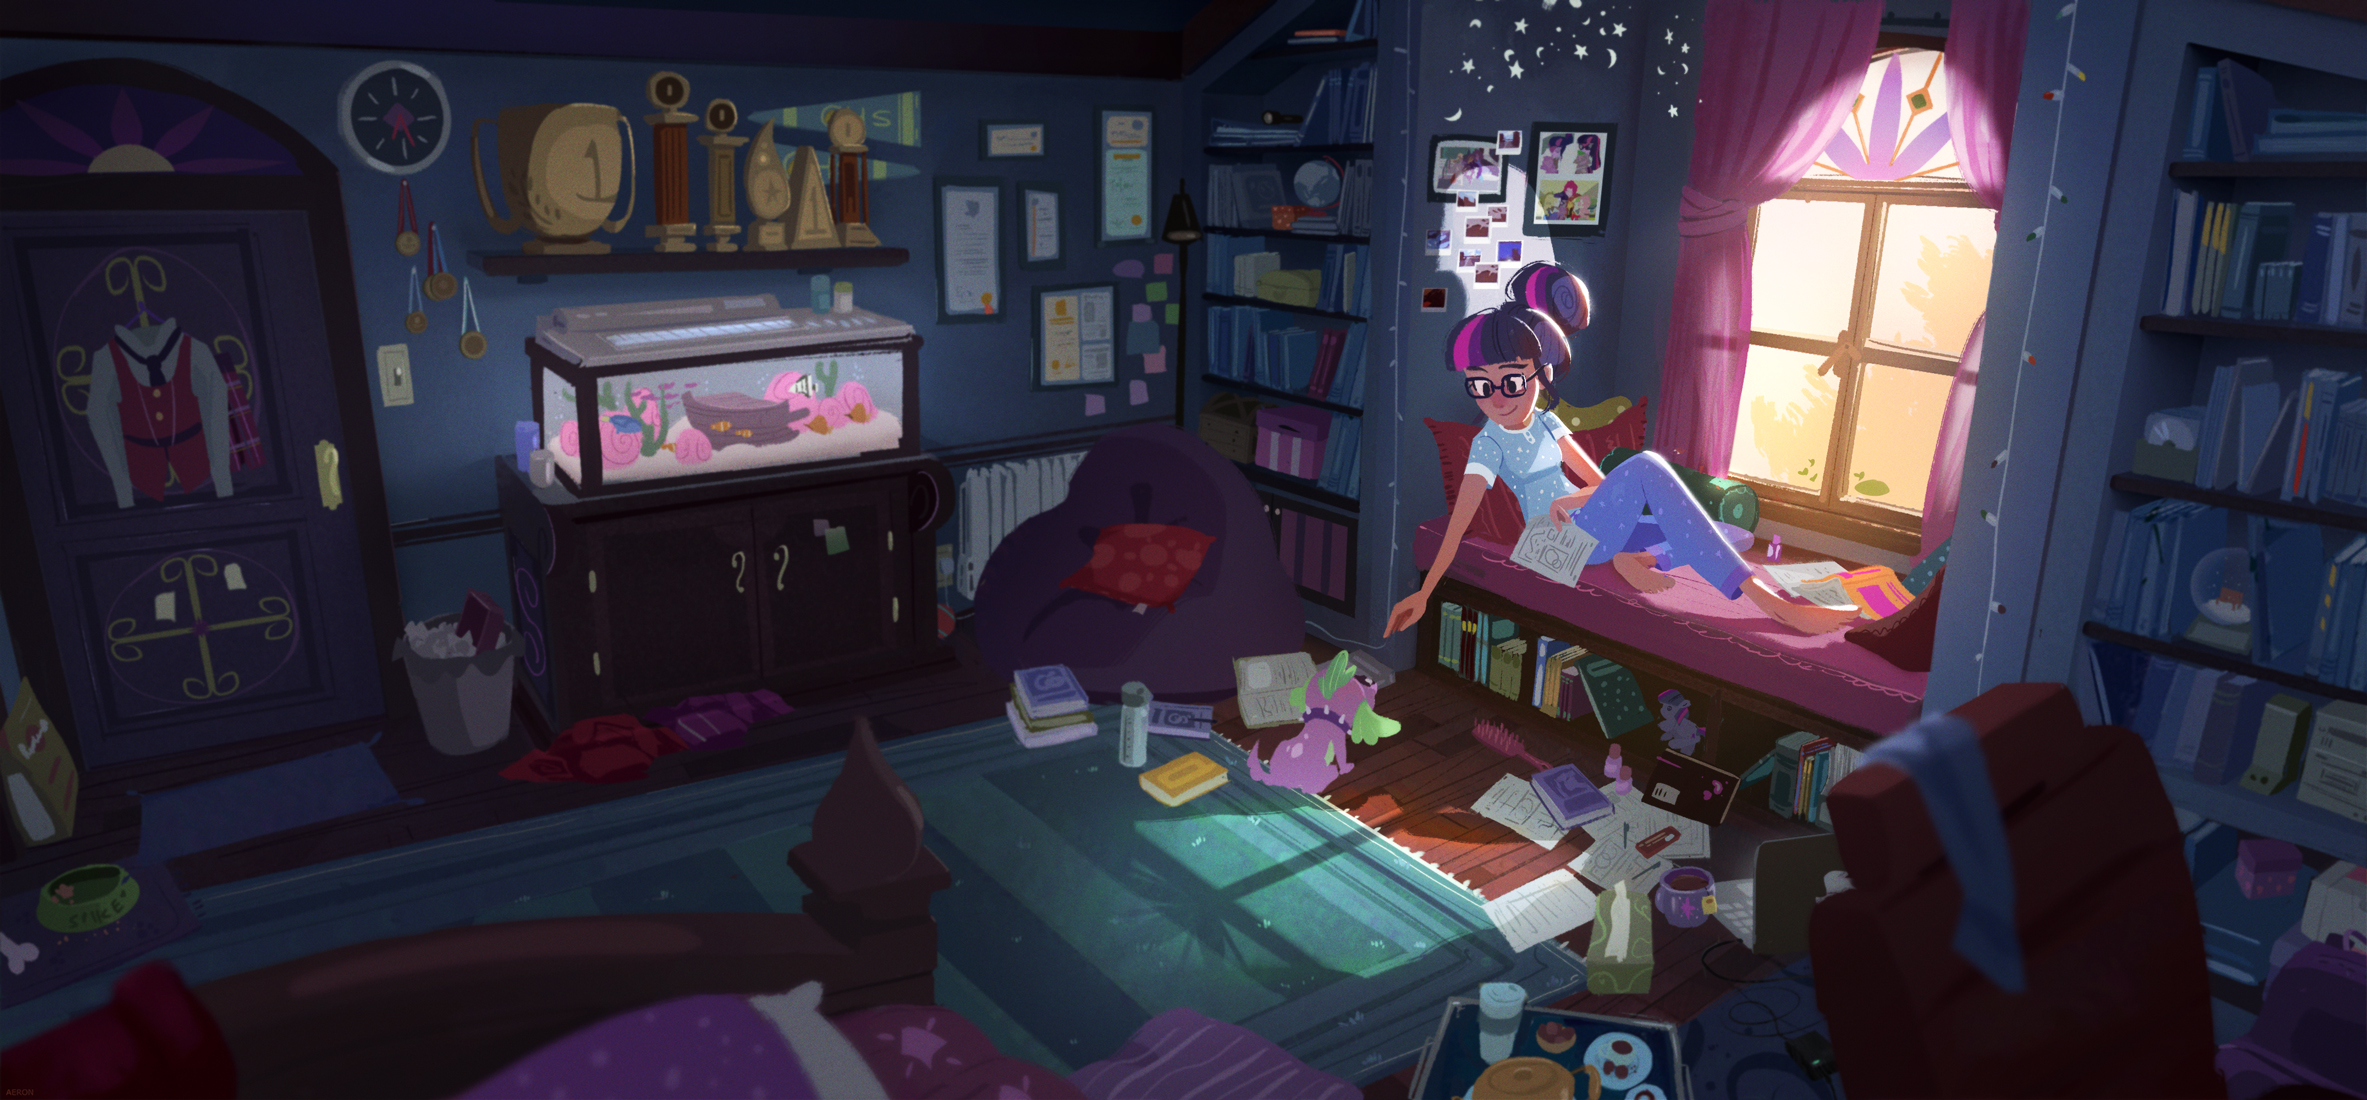 One Late Afternoon - Twilight Sparkle